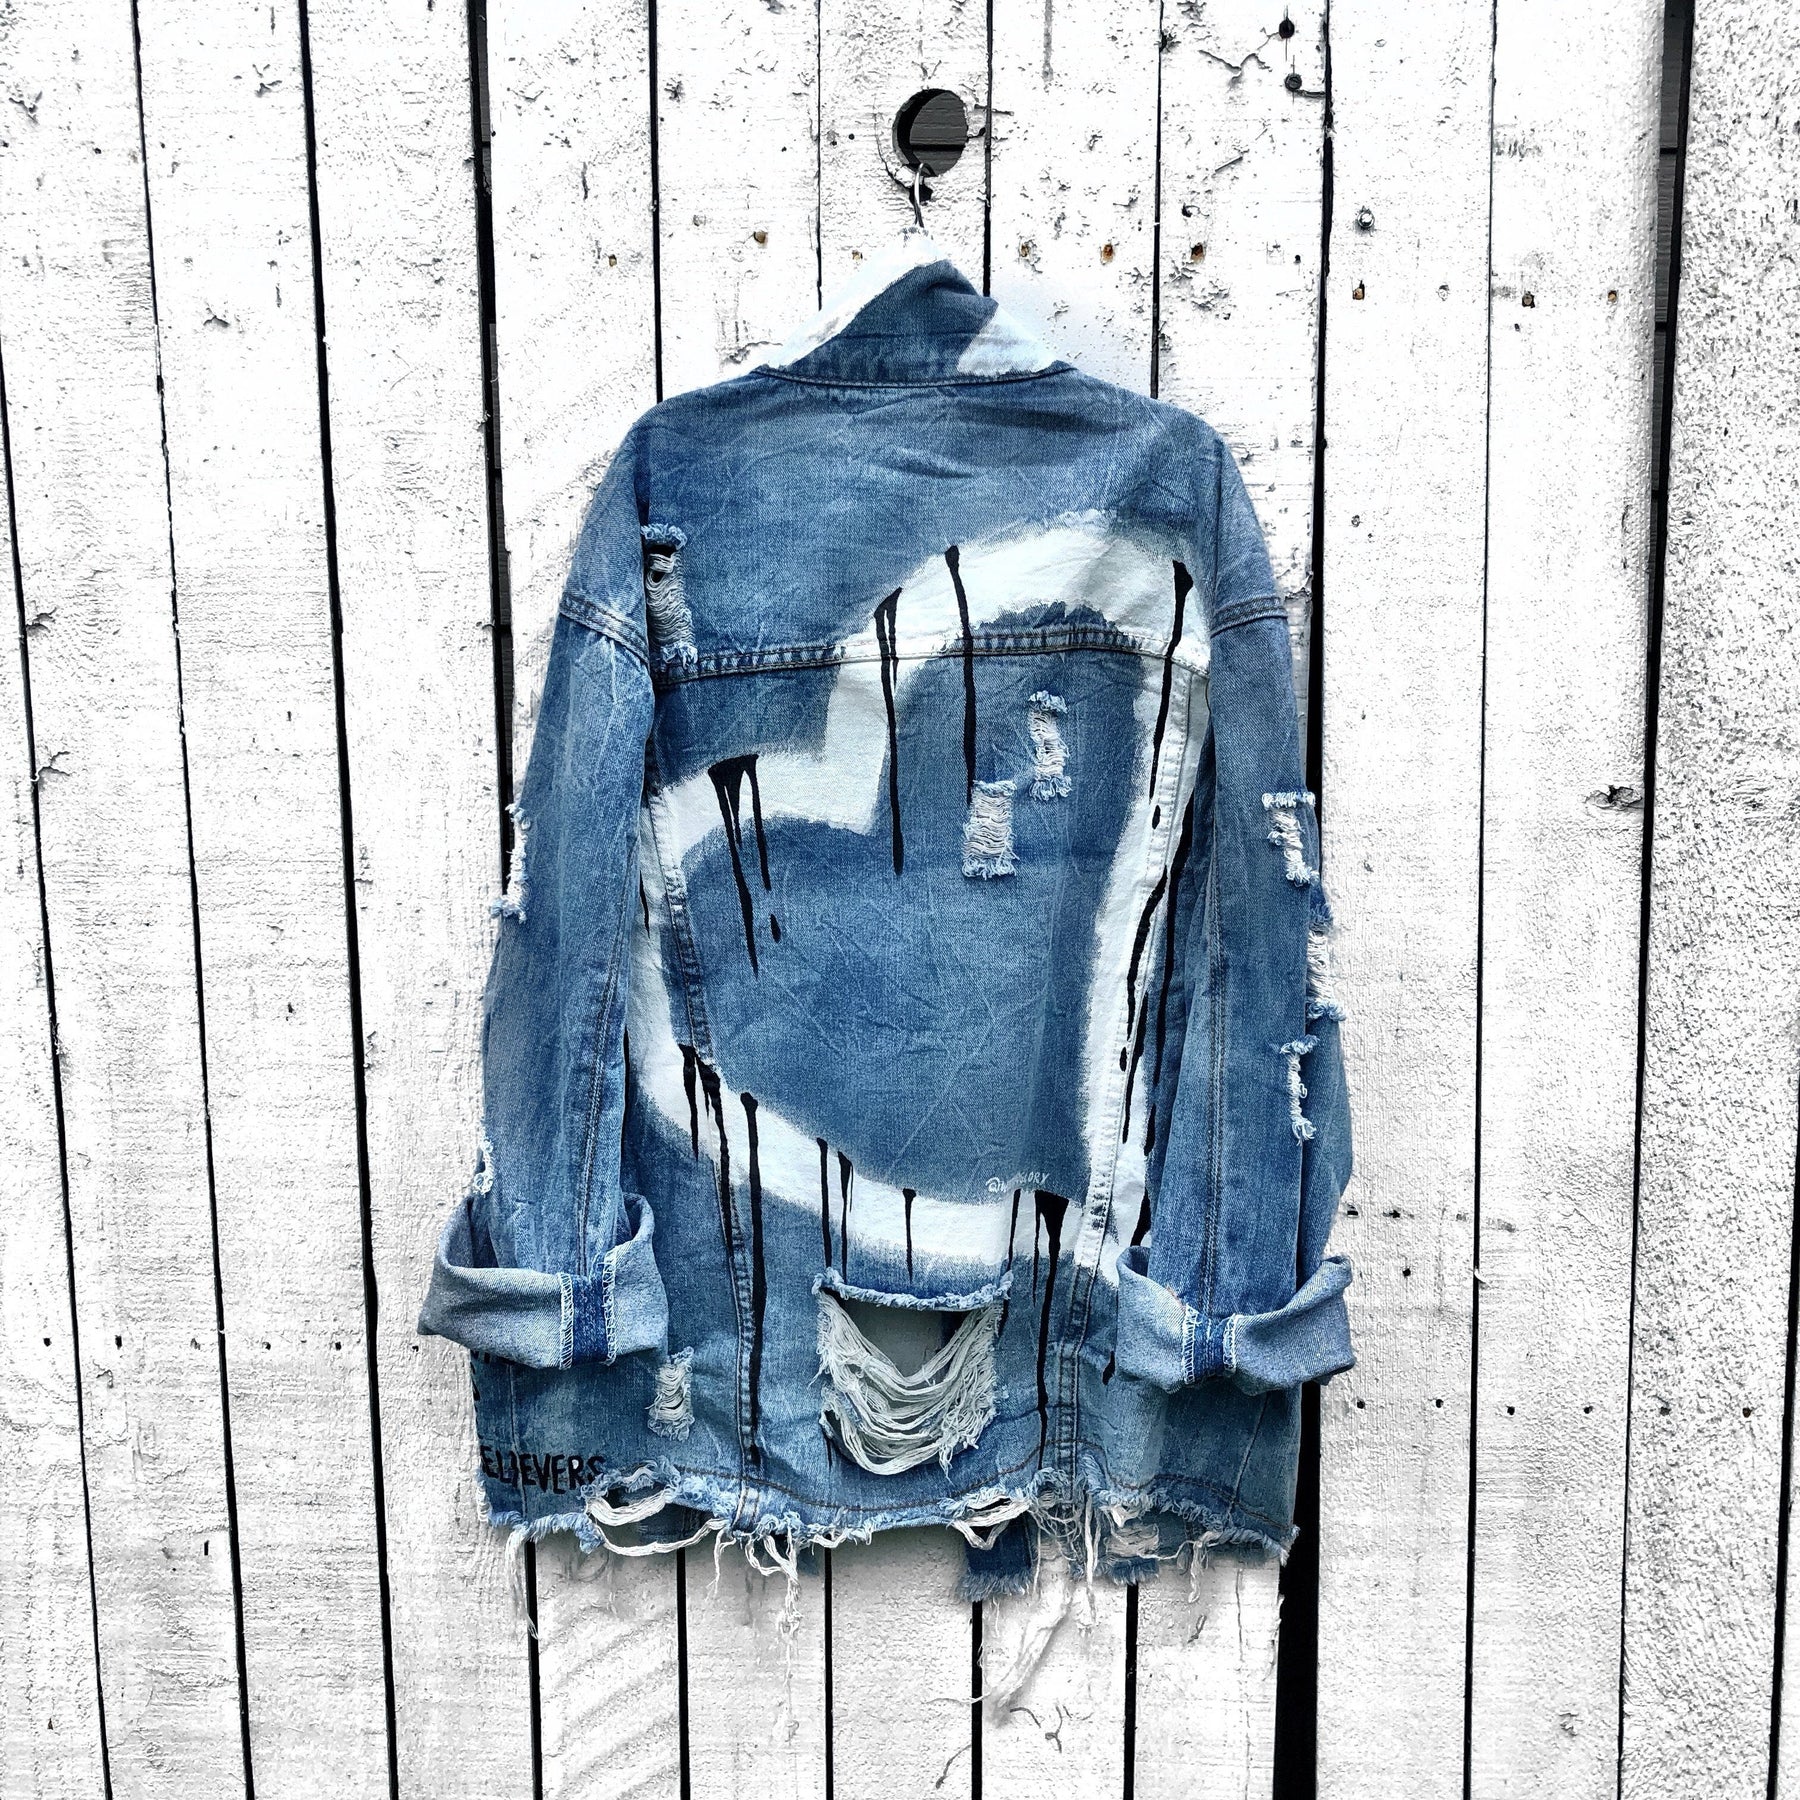 Medium blue denim wash. Large white heart painted all across back, with black dripping effect. Painted in black'Made for the lovers, beauties, artists, dreamers......' on front lower left side. White thick stripes at the collar. Signed @wrenandglory.